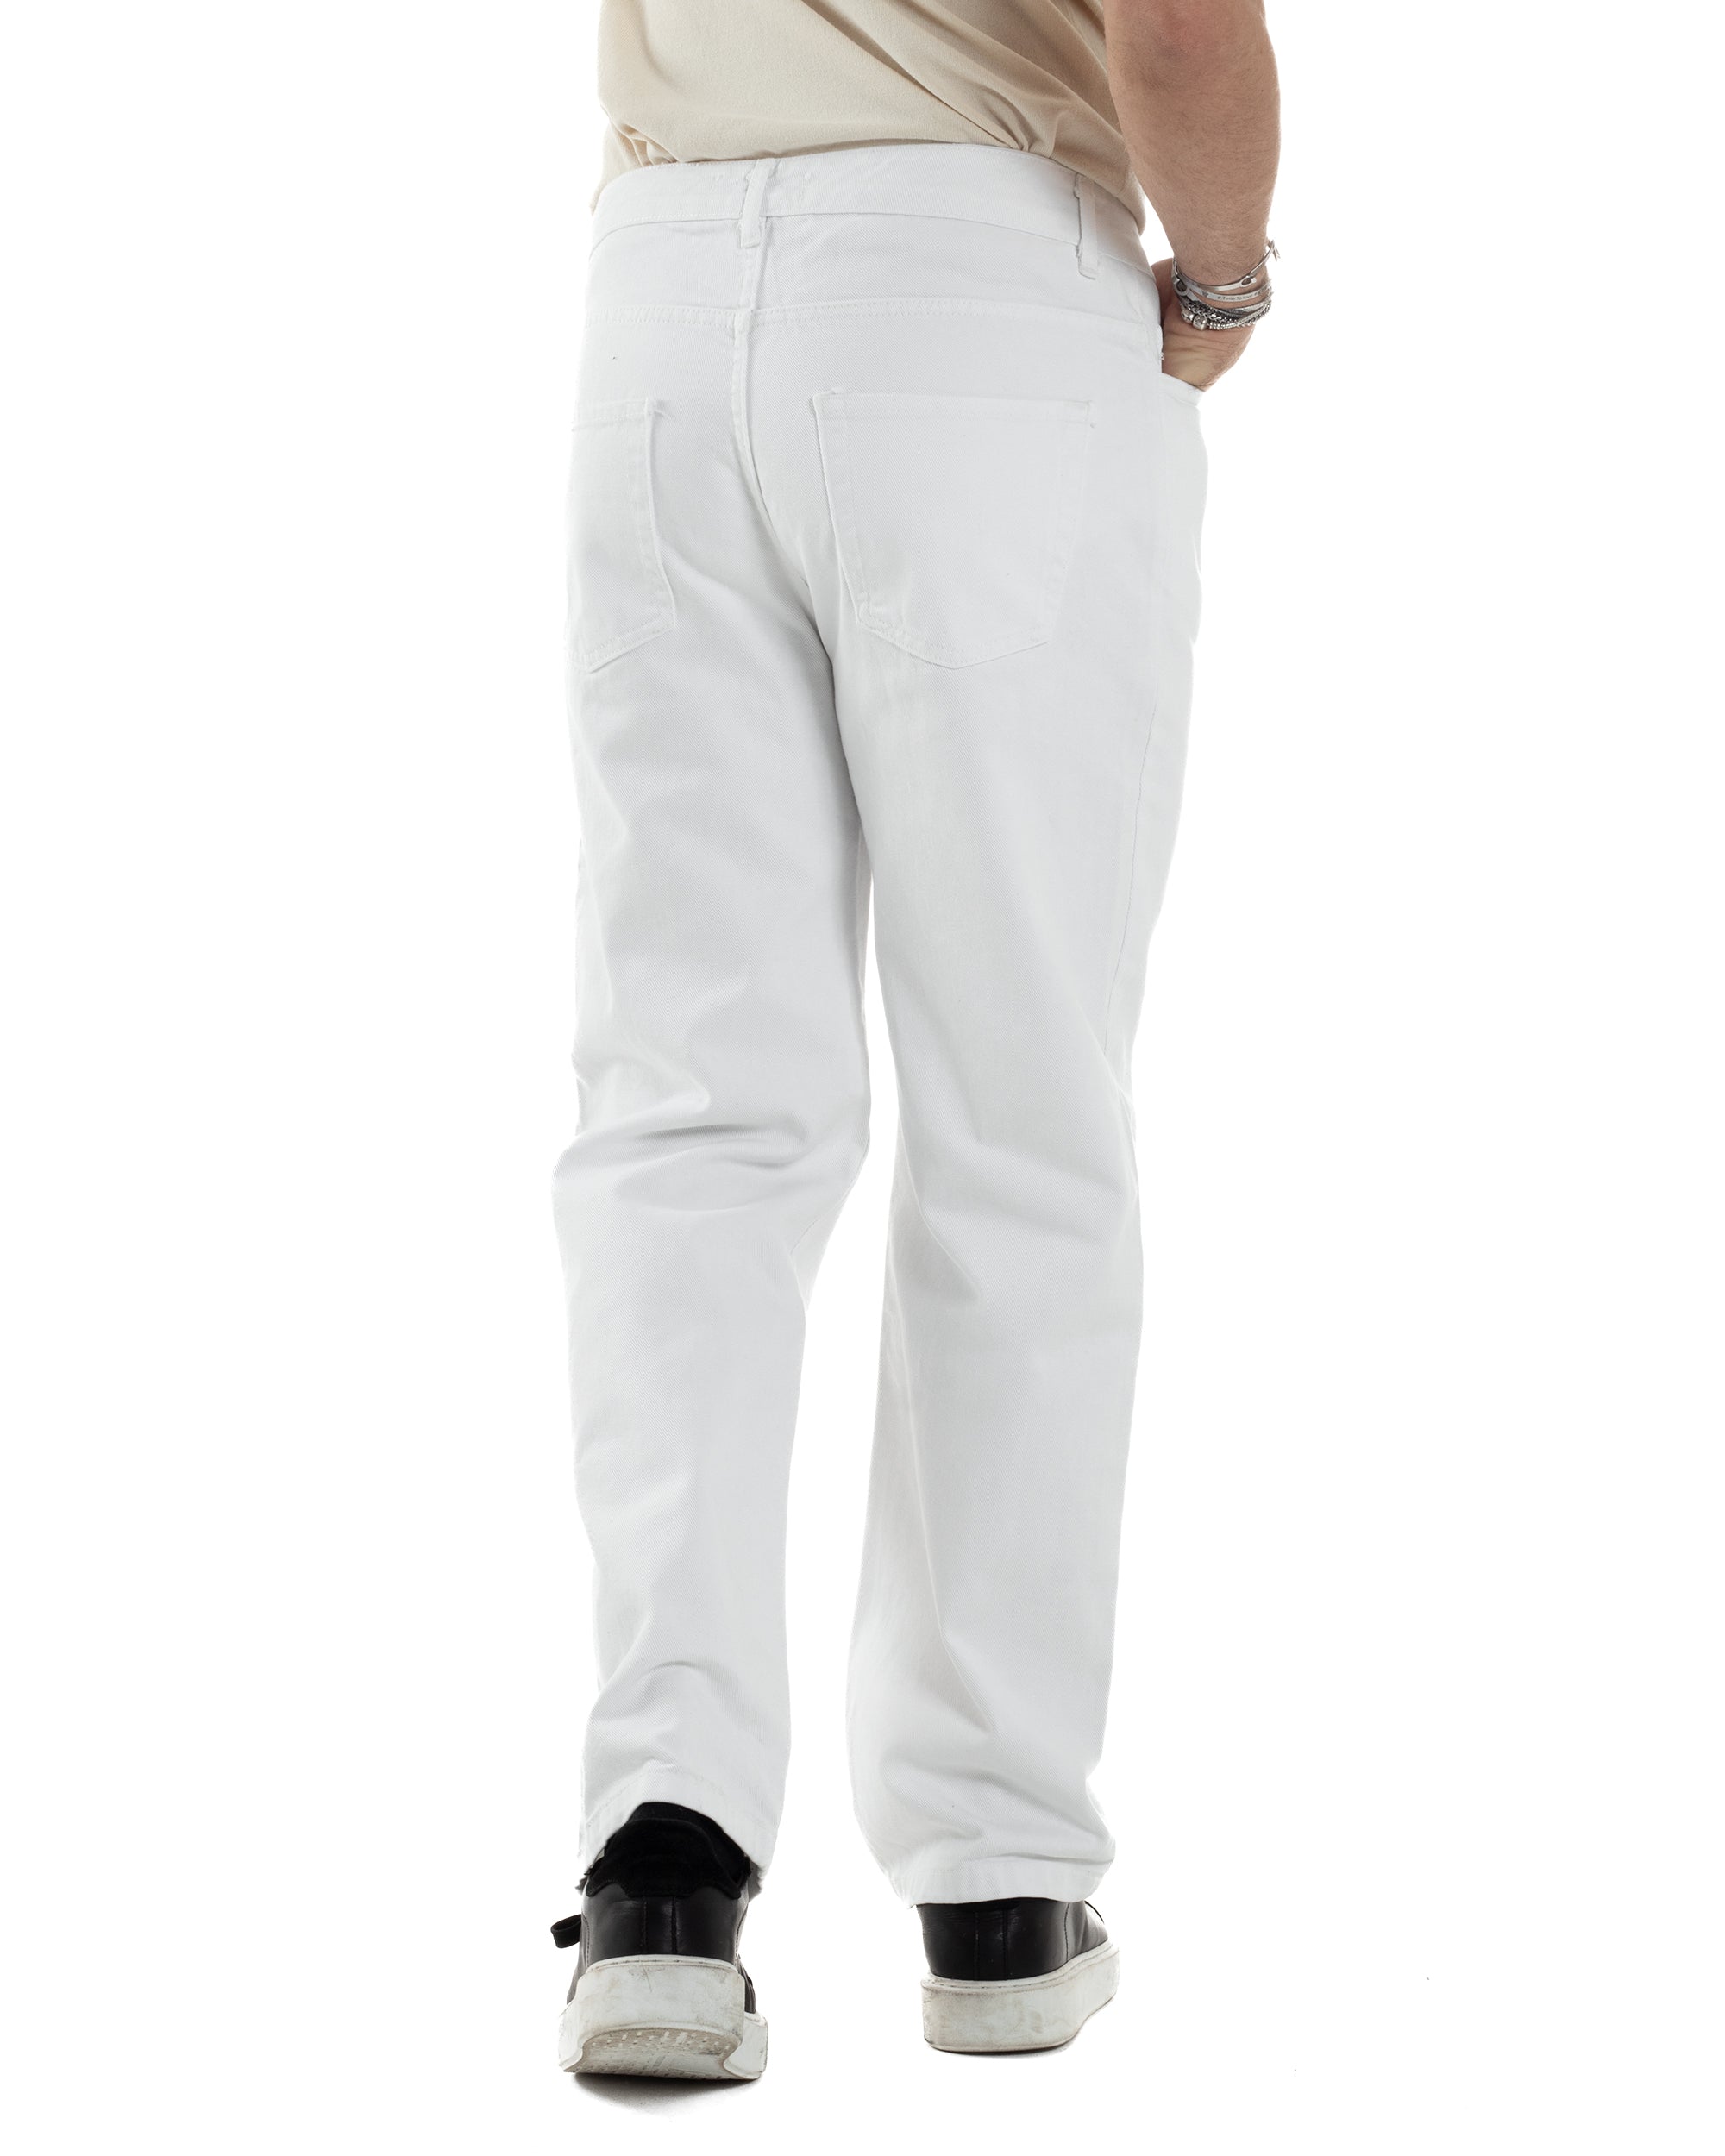 Pantaloni Uomo Jeans Straight Fit Baggy Basic Cinque Tasche Bianco GIOSAL-JS1039A